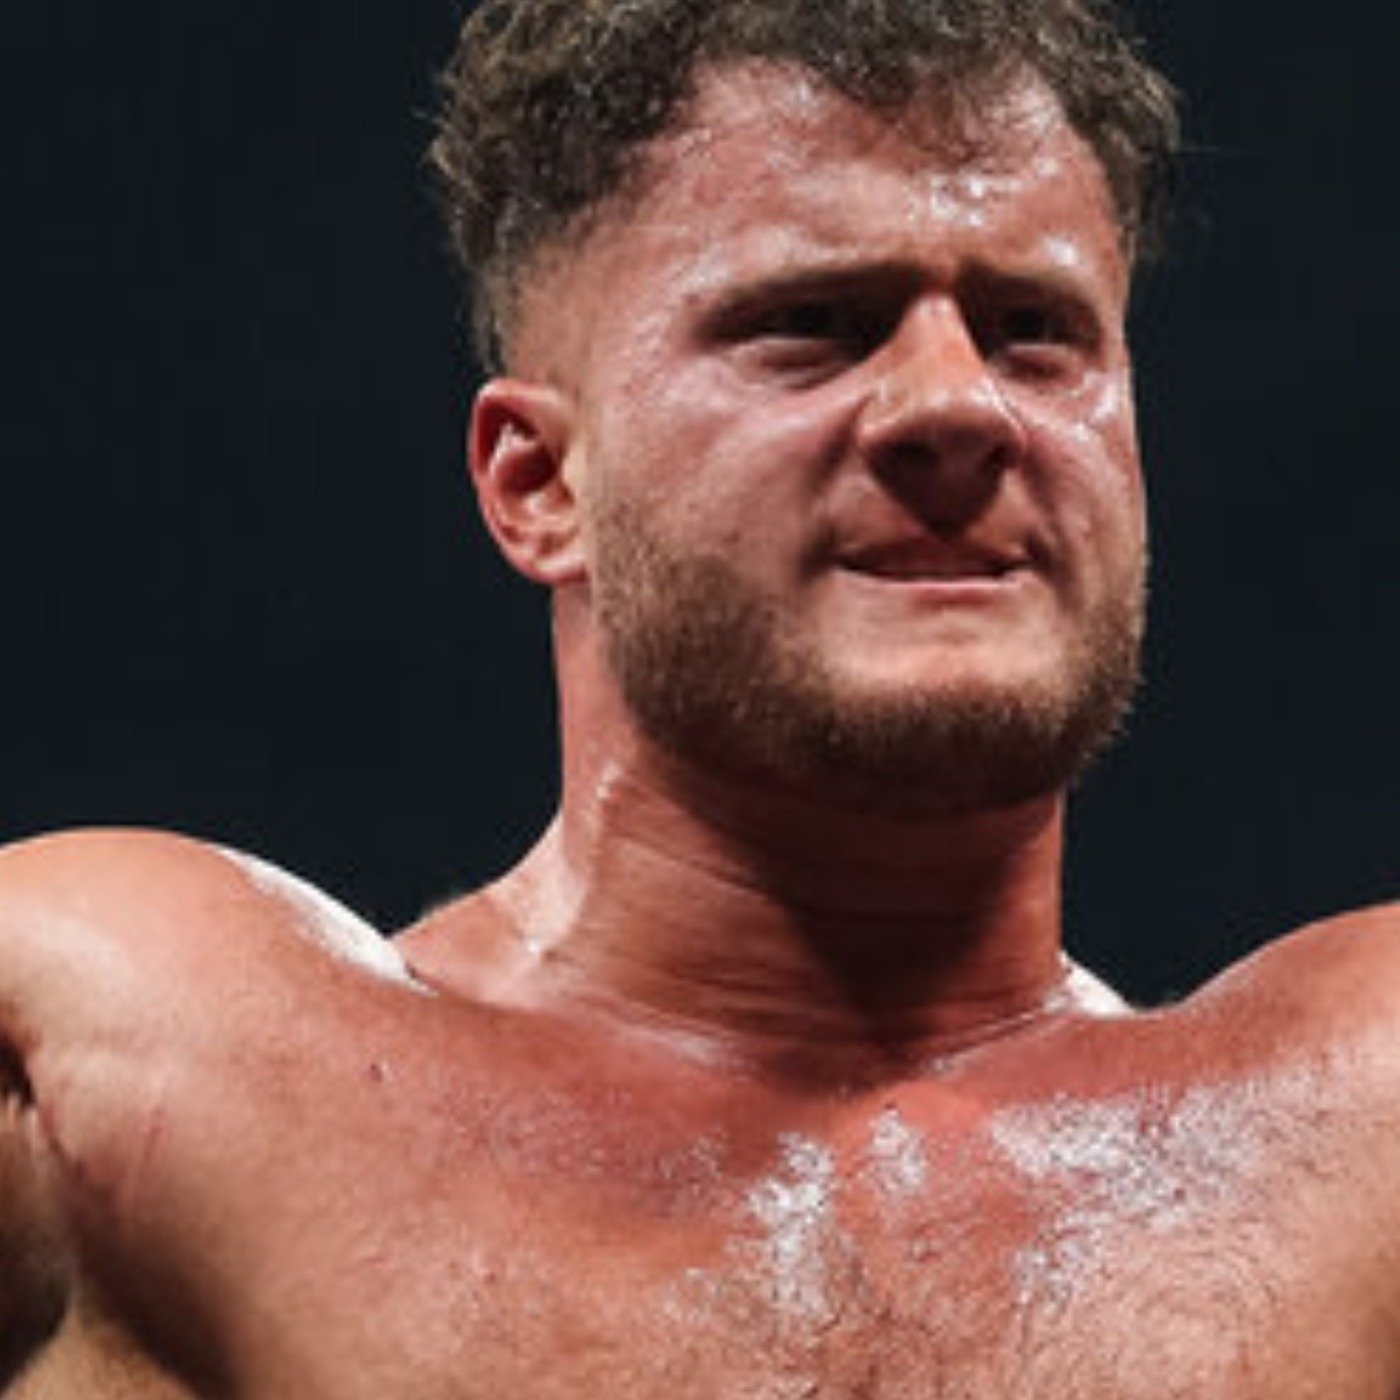 WINC Podcast (11/01): AEW Dynamite Review, More